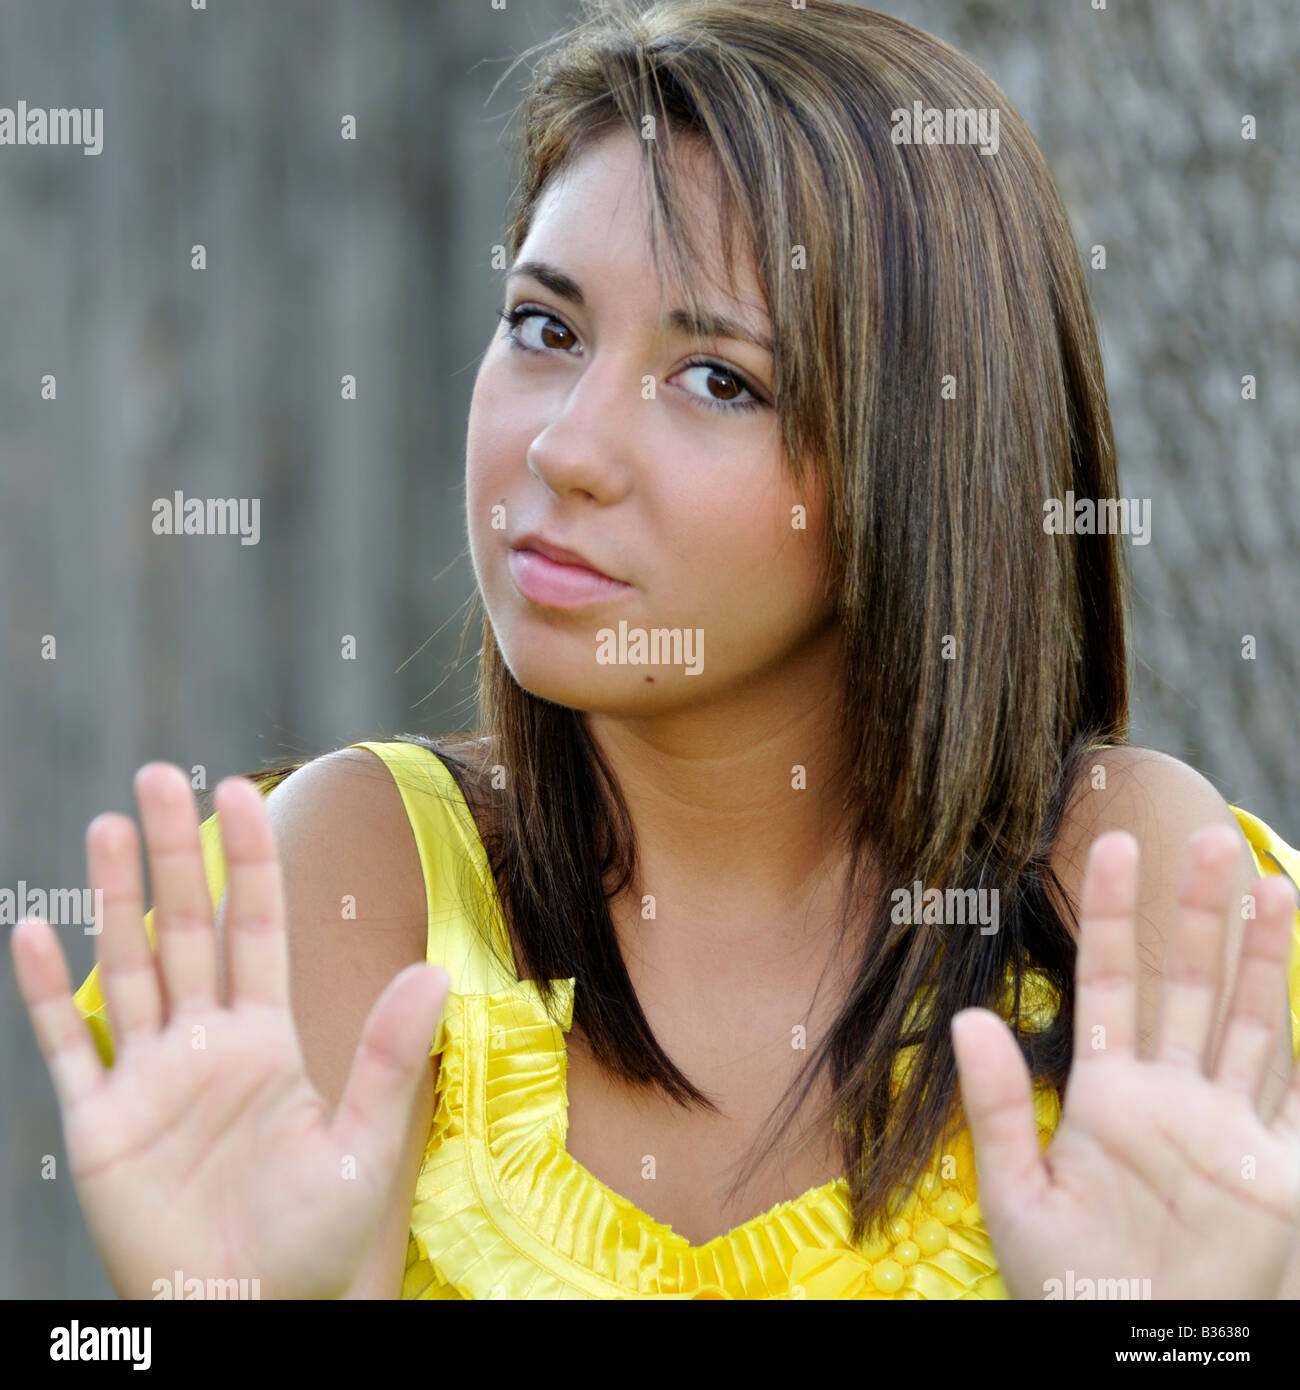 A 16 year old pretty caucasian girl, brown hair, brown eyes, holds her hands out in a warding off gesture. Conceptual image. Stock Photo